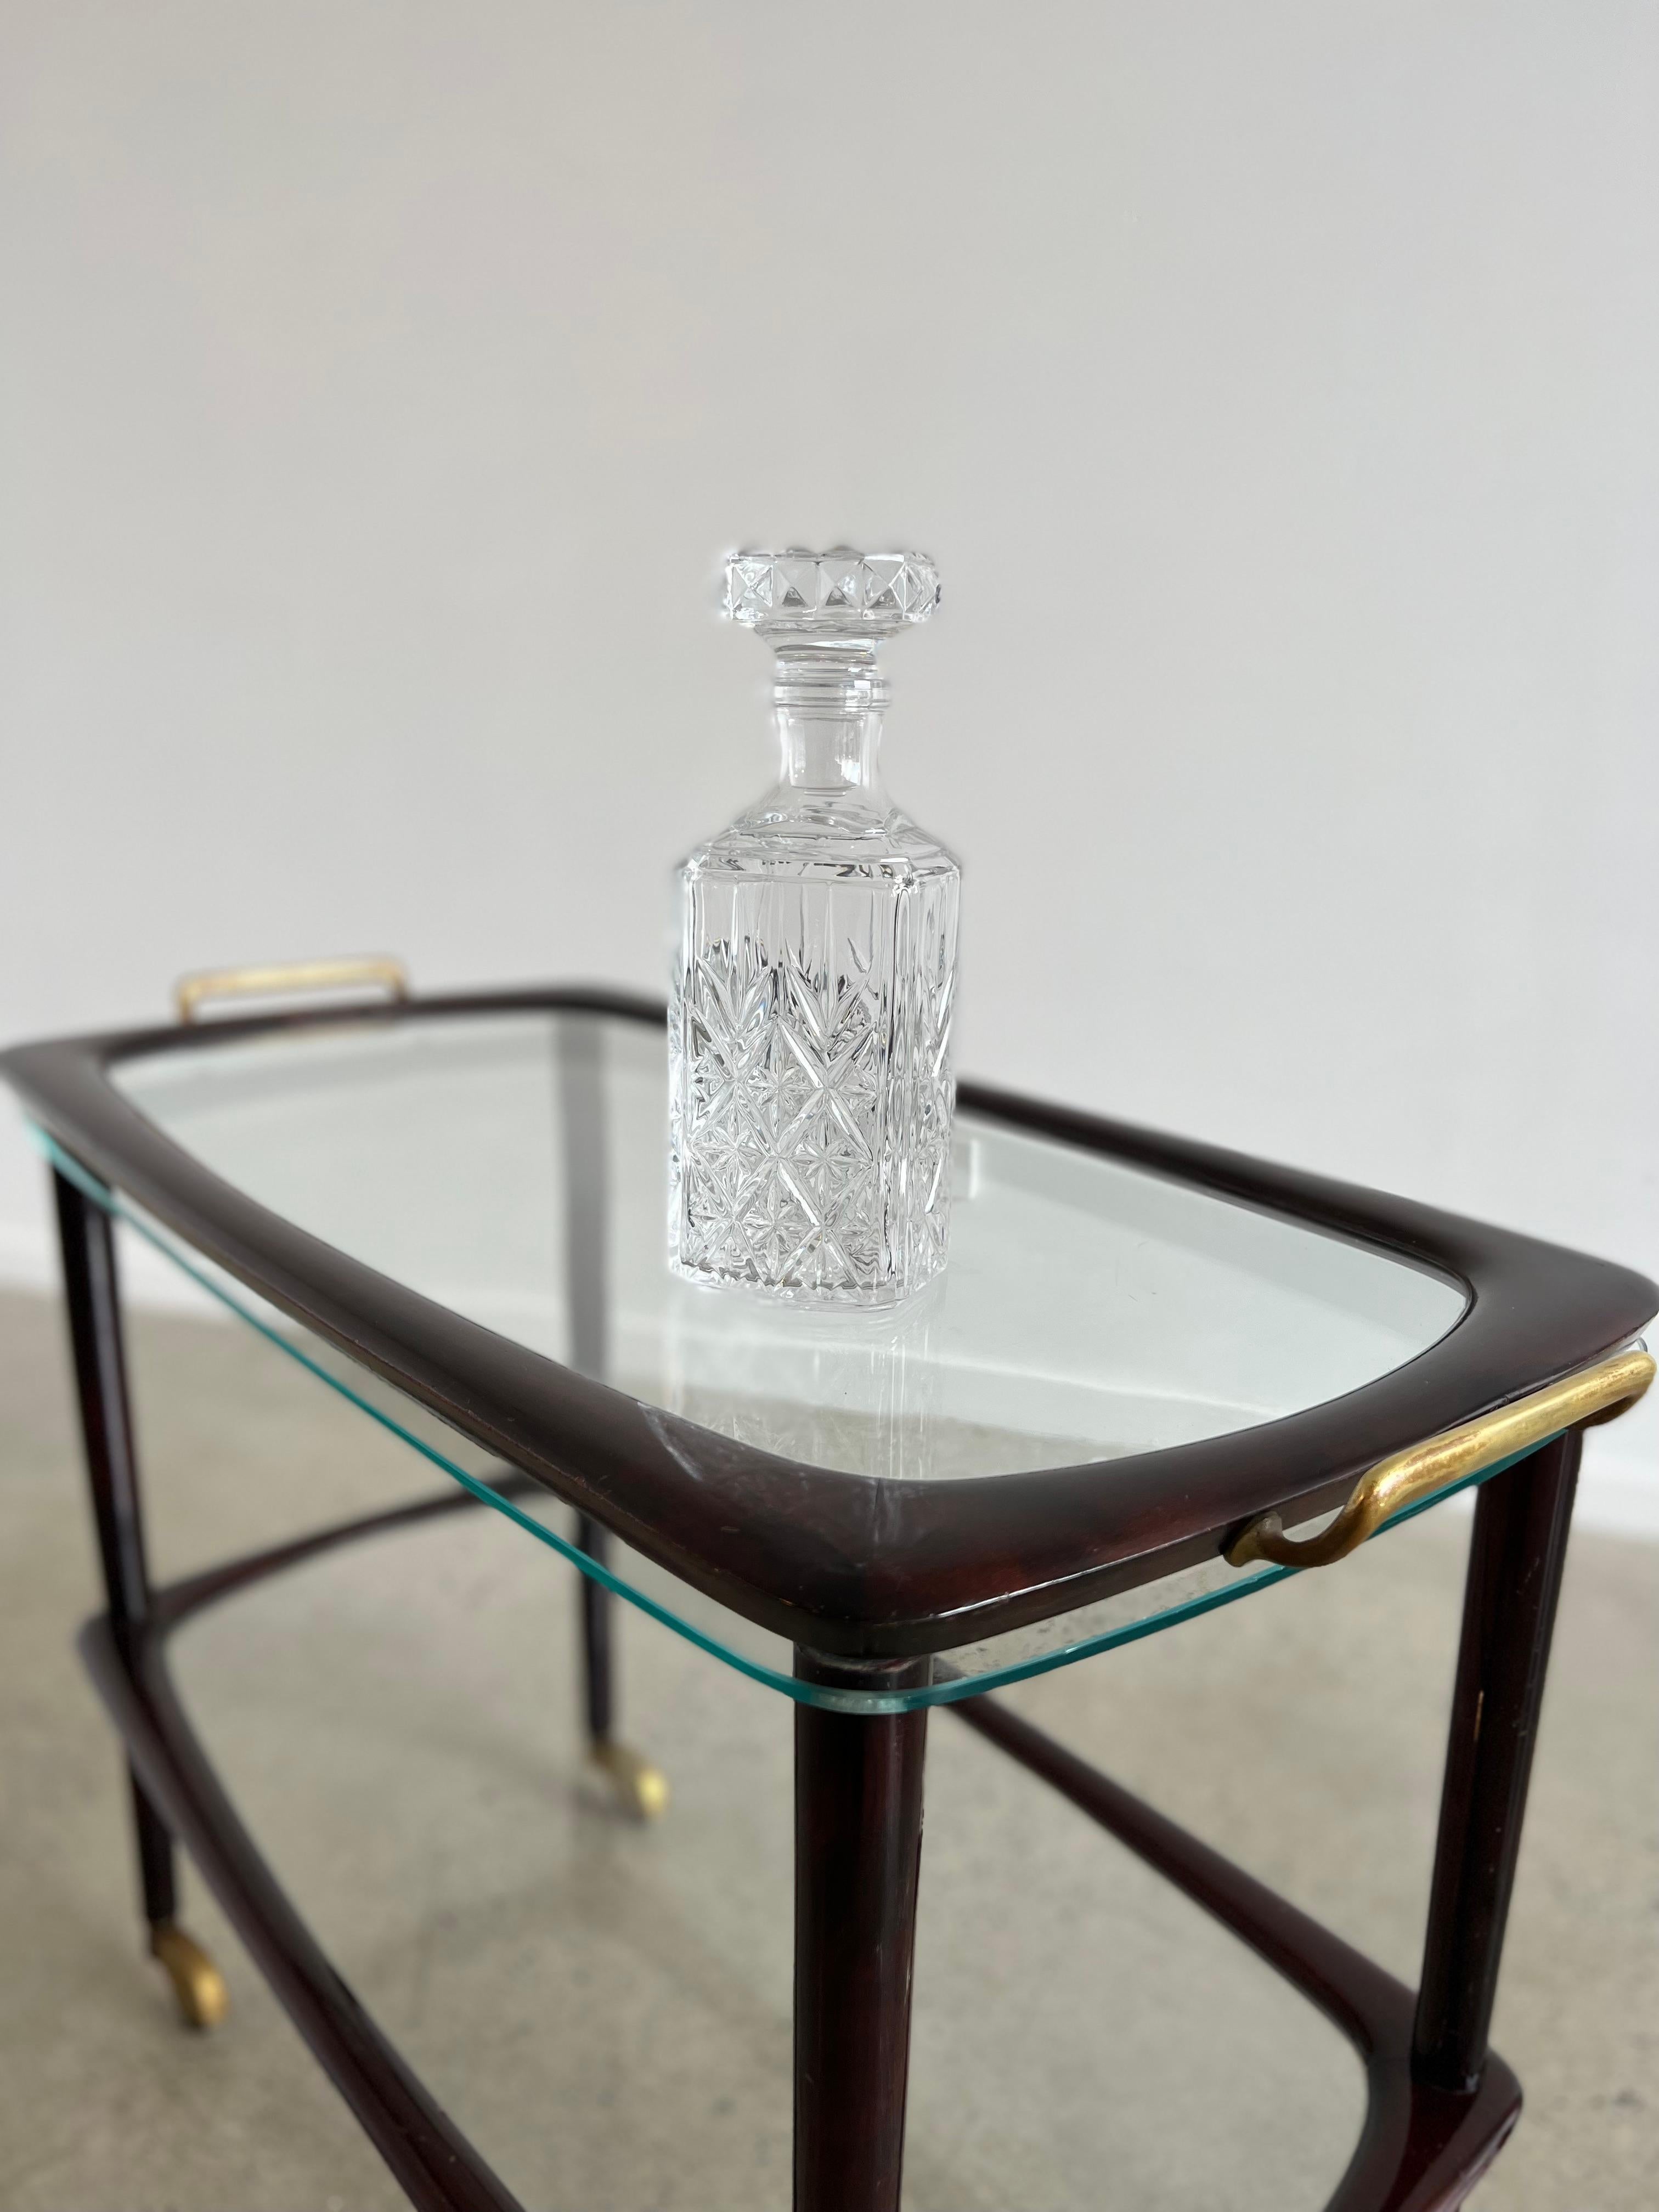 Mid-Century Modern Italian Bar Cart by Cesare Lace for Fratelli Reguitti 1950s For Sale